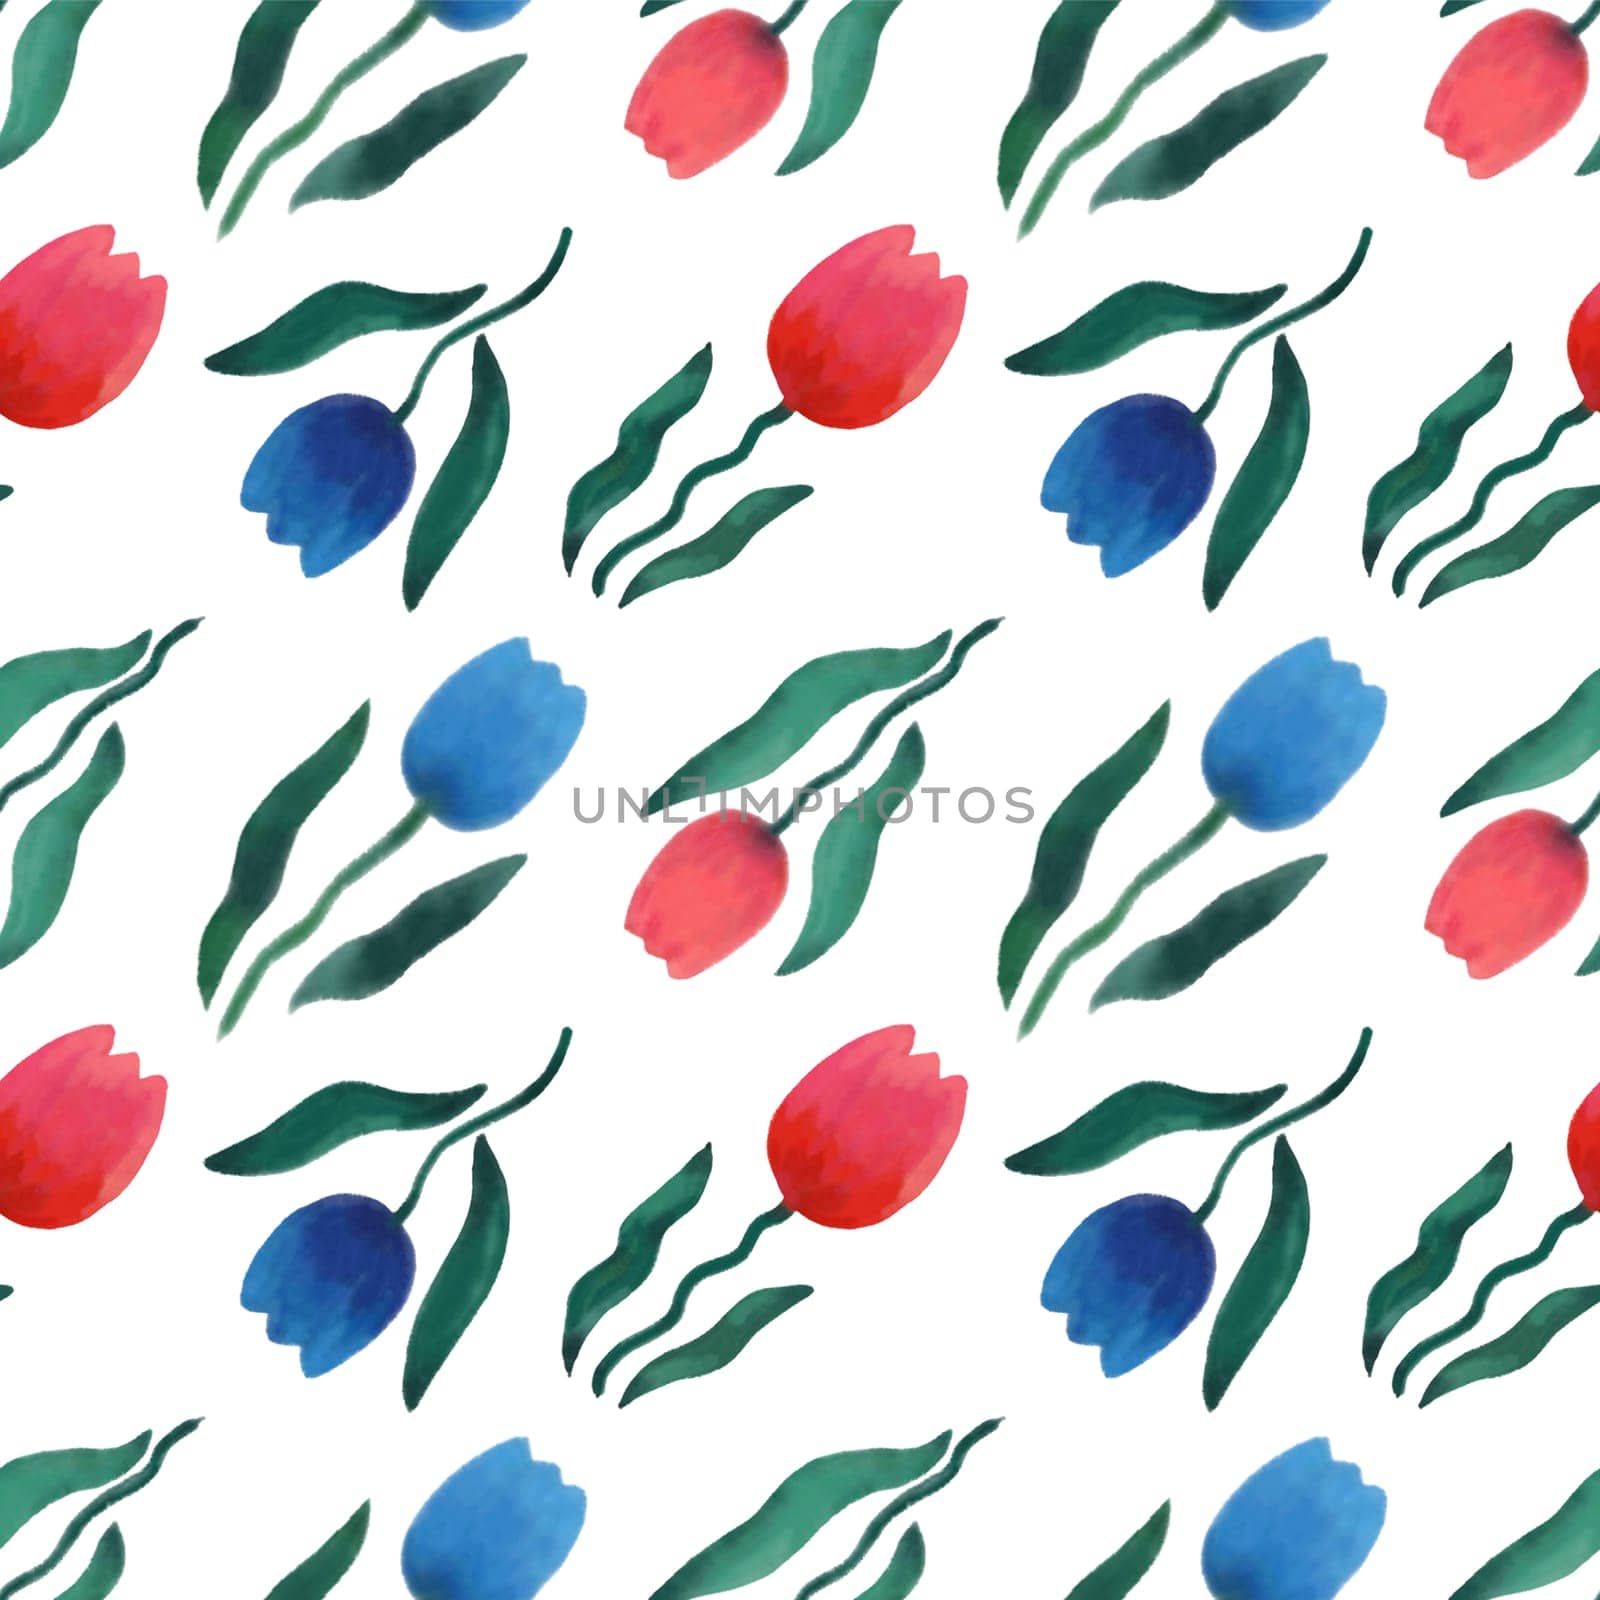 Floral pattern with spring flowers tulips. Hand drawn illustration by Dustick